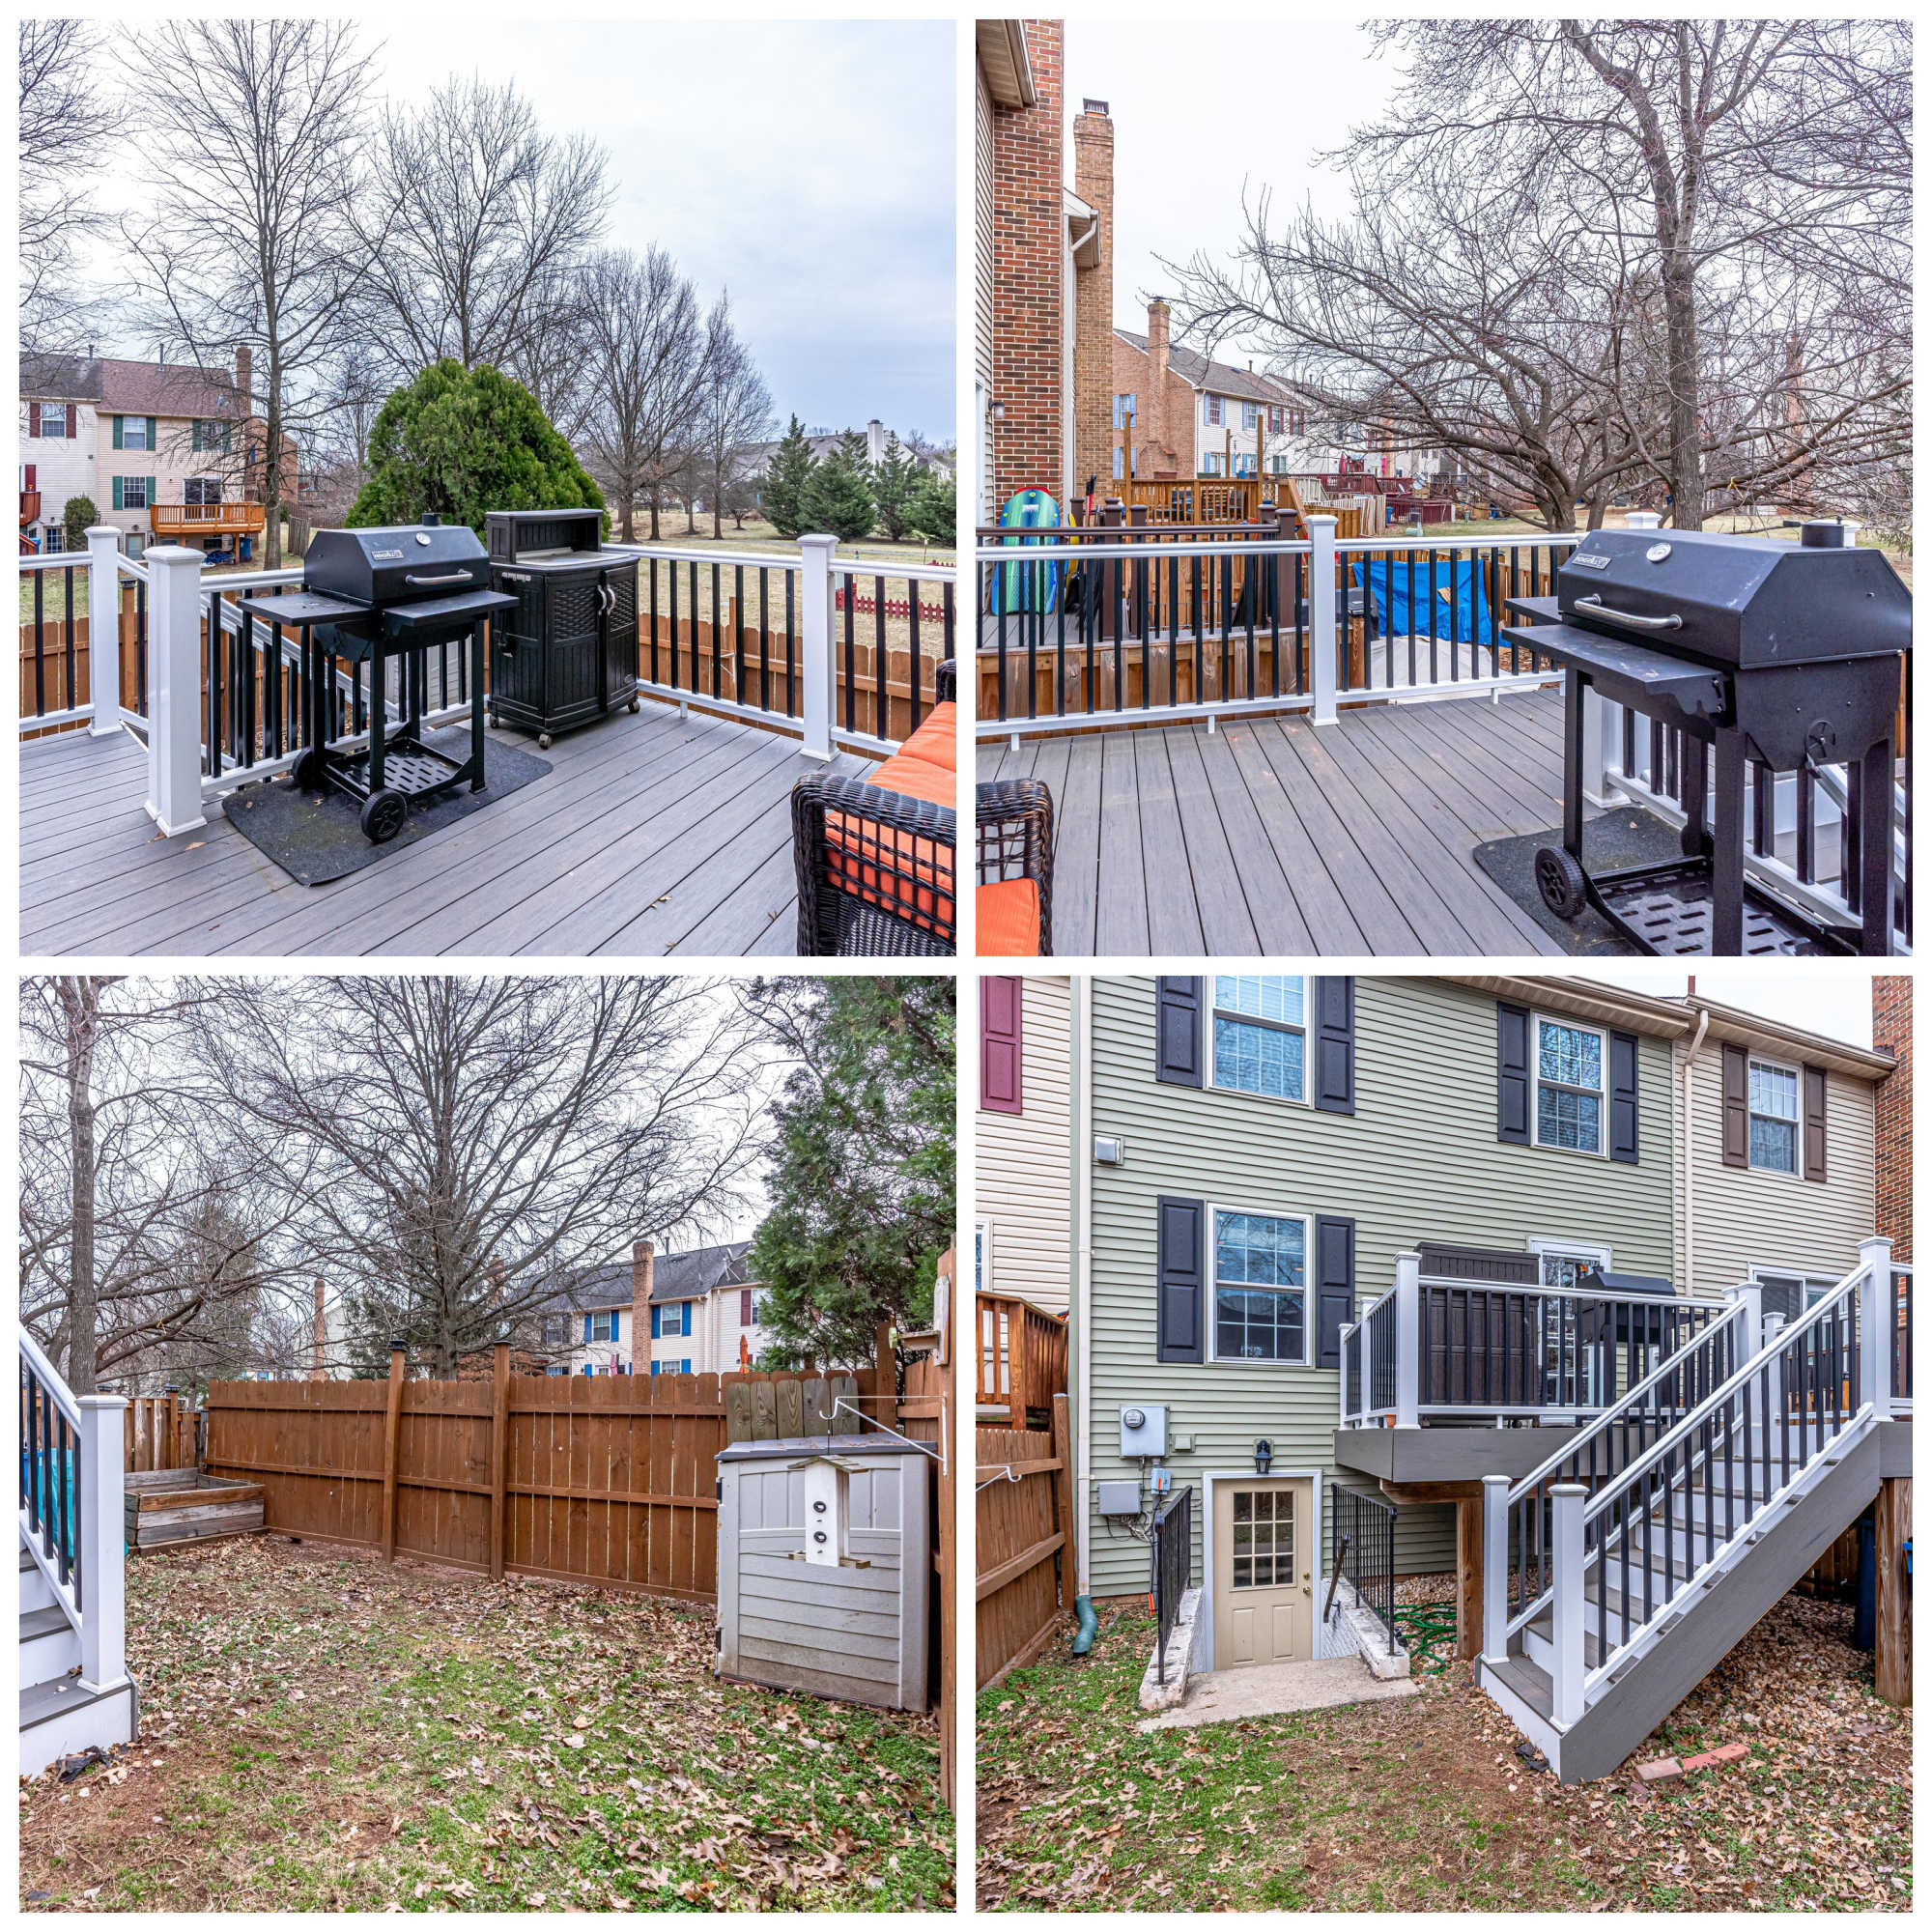 44058 Ferncliff Ter, Ashburn- Deck and Yard